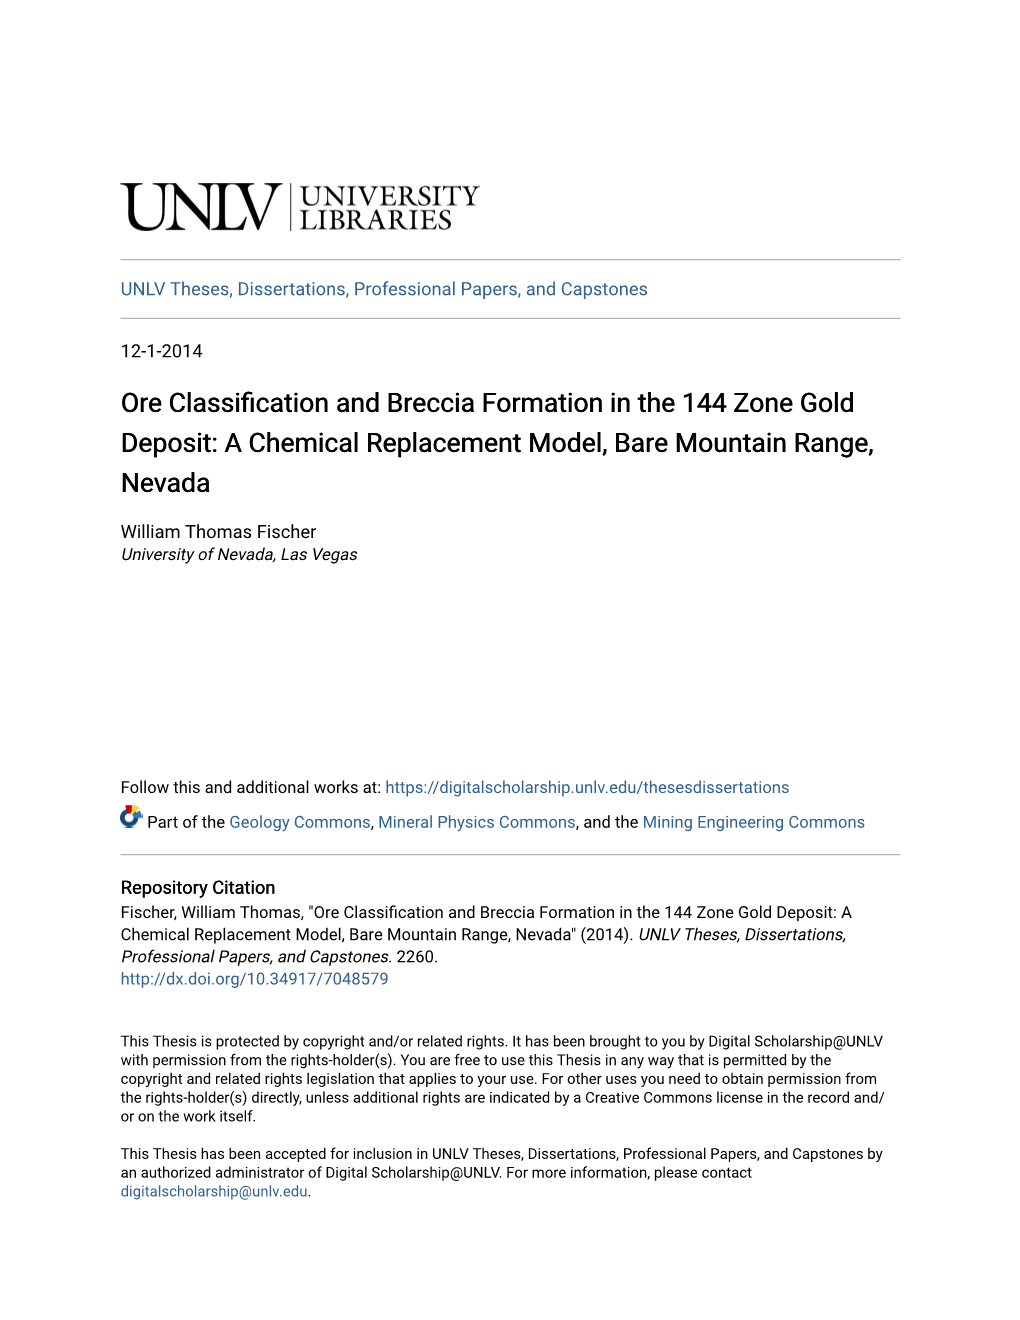 Ore Classification and Breccia Formation in the 144 Zone Gold Deposit: a Chemical Replacement Model, Bare Mountain Range, Nevada